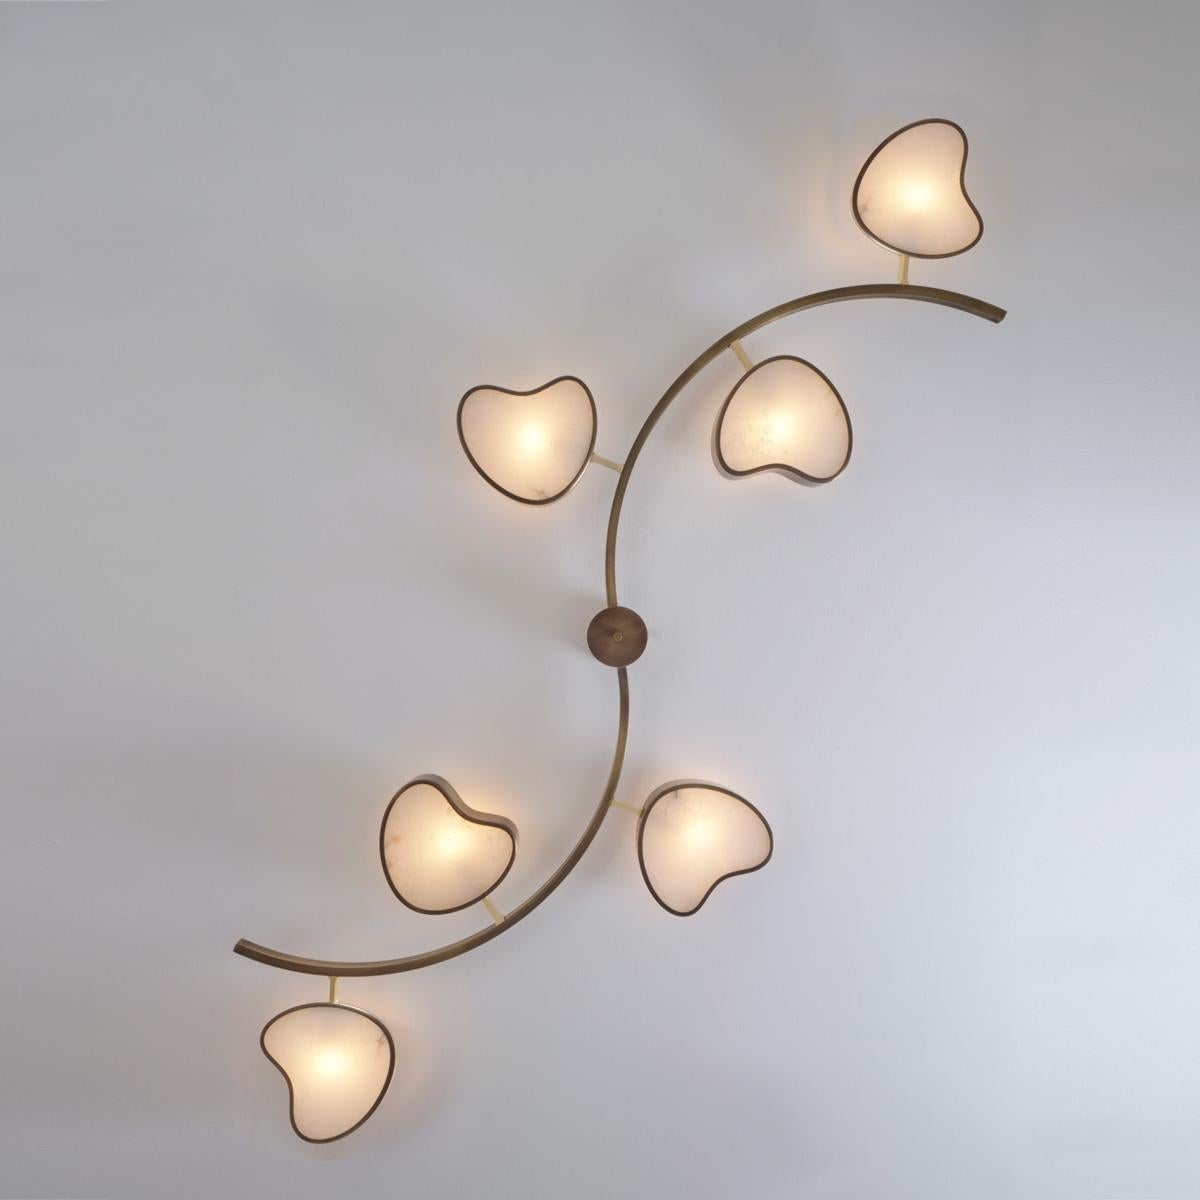 Italian Cuore N.6 Ceiling Light by Gaspare Asaro. Peltro and Bronze Finish For Sale